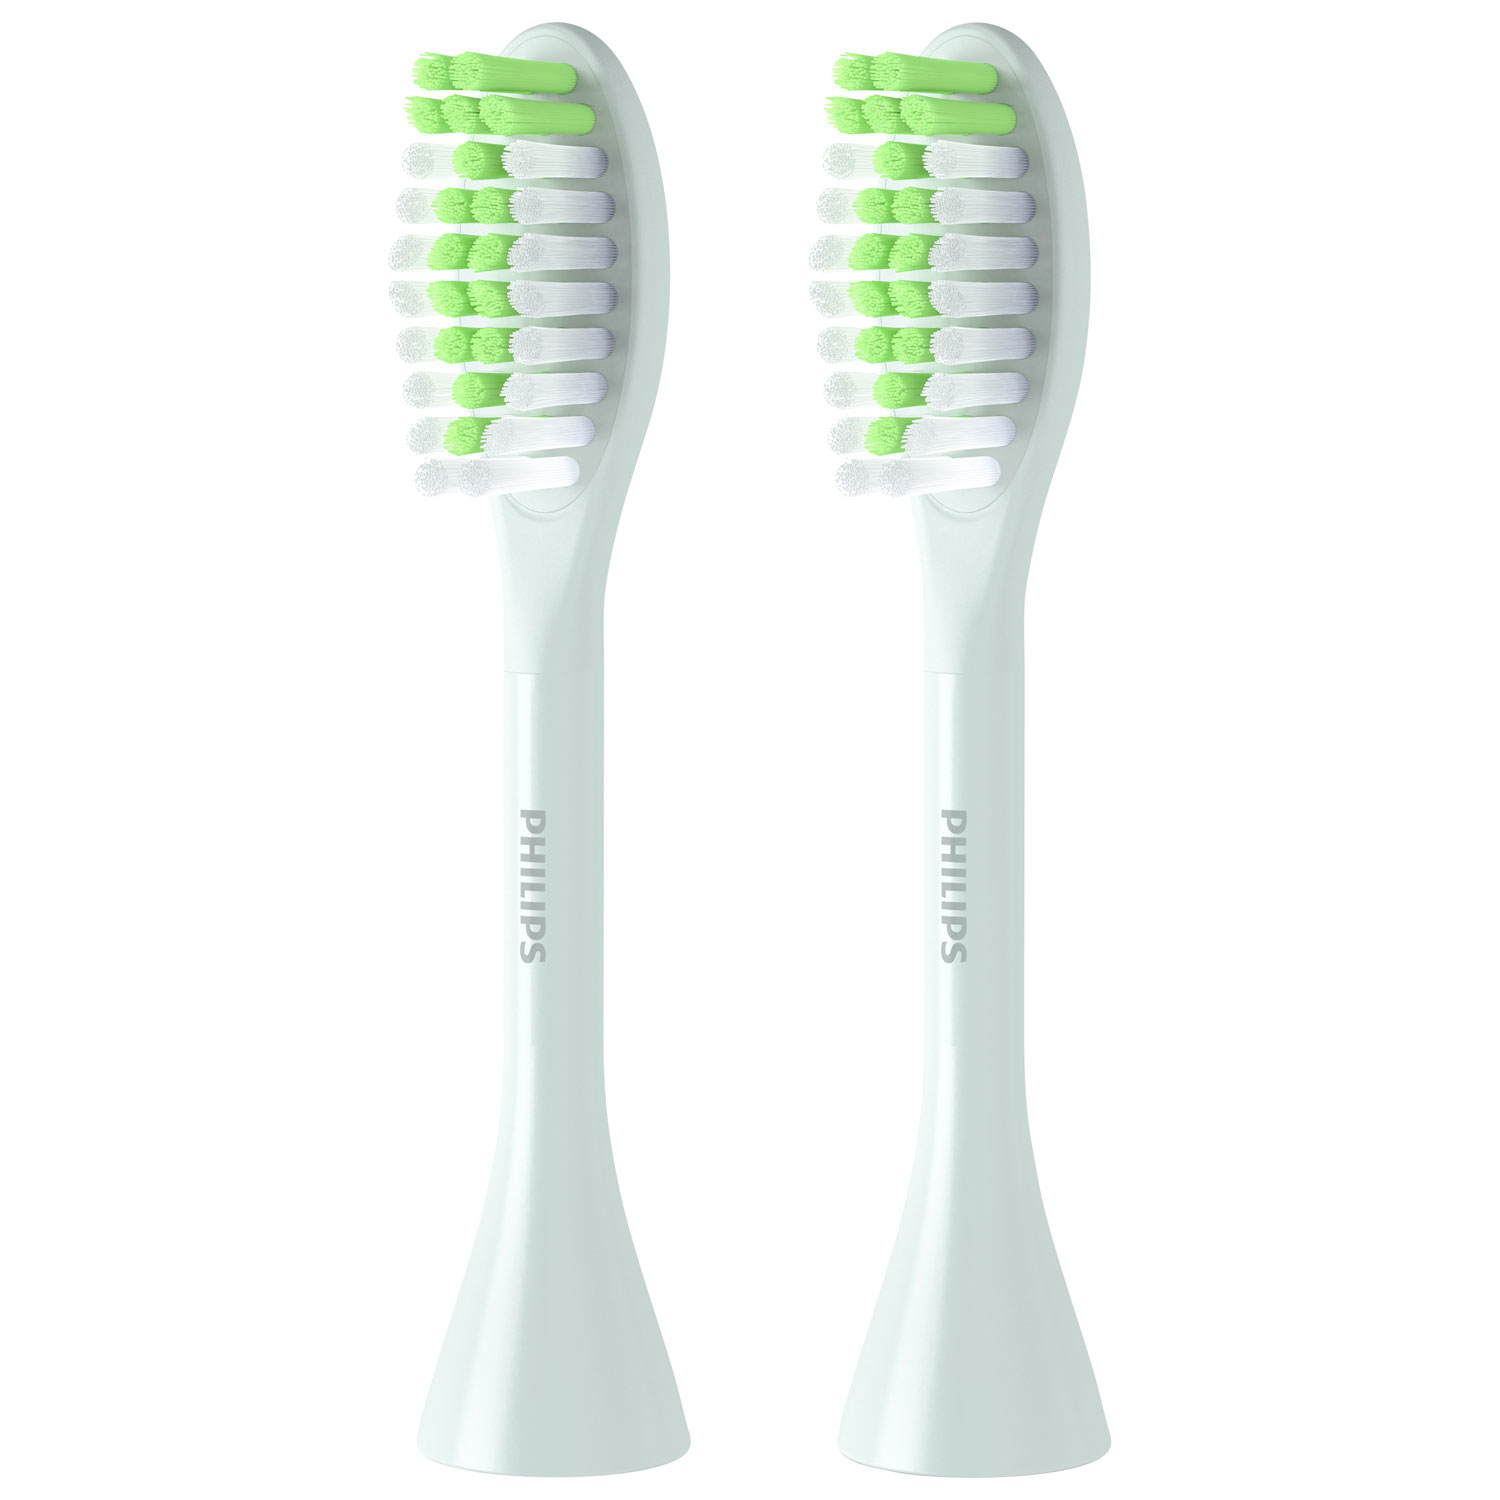 Philips One by Sonicare Replacement Brush Head (BH1022/03) - 2 Pack - Mint